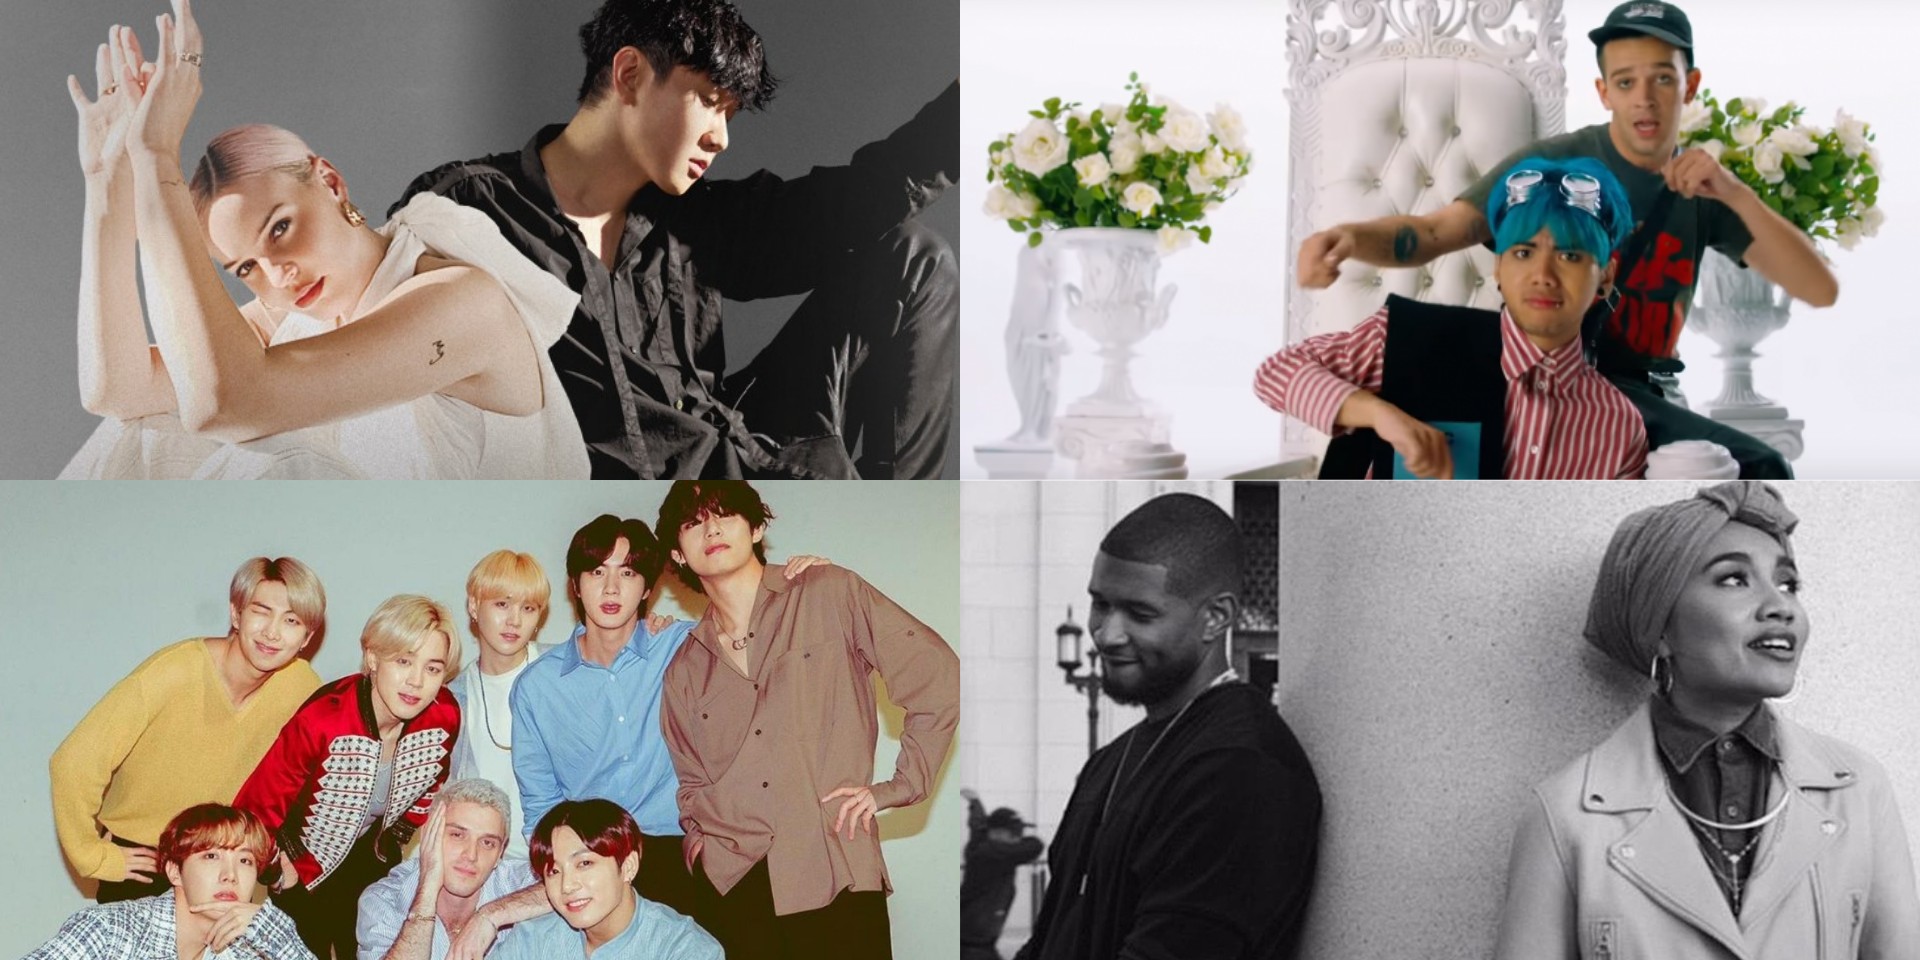 14 Asian and Western collaborations featuring JJ Lin, Yuna, BTS, No Rome, and more